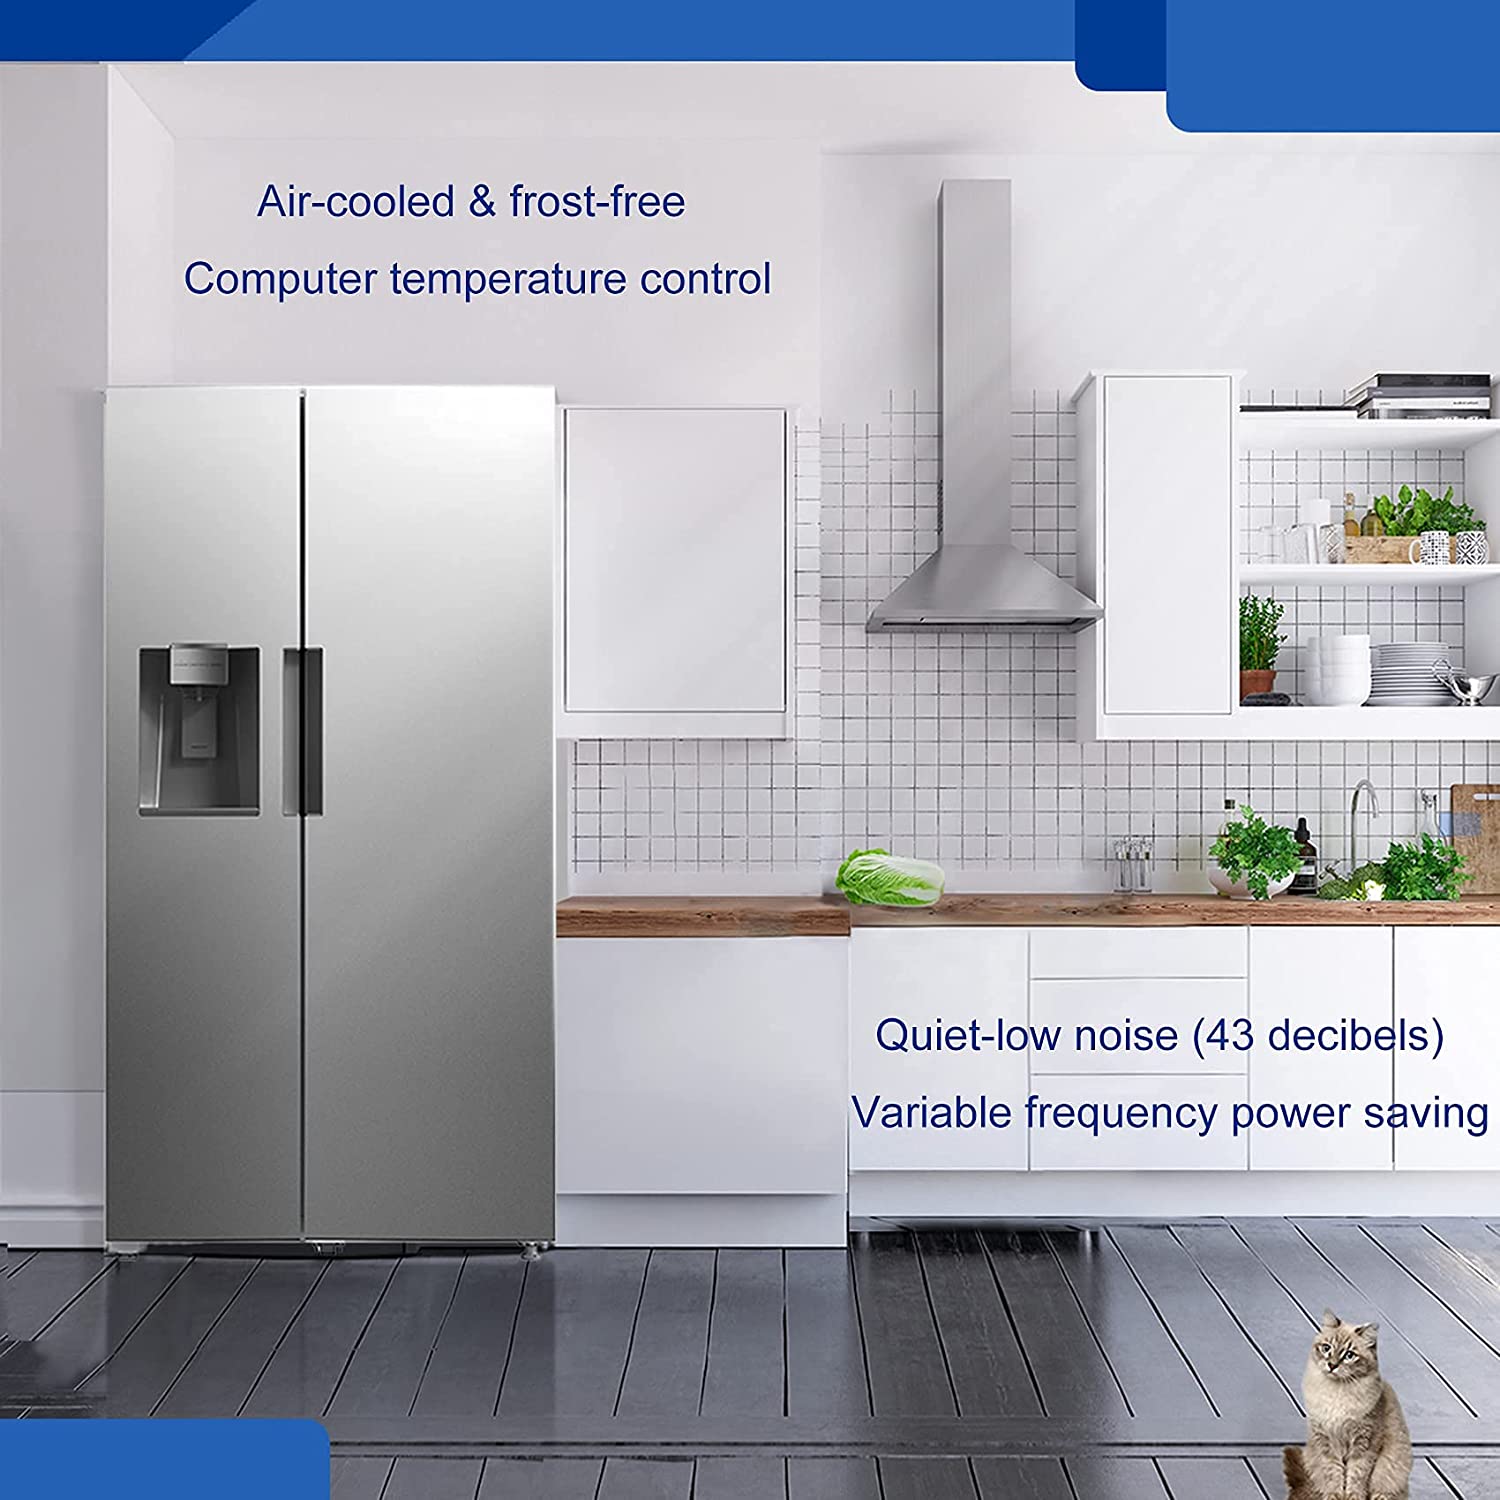 SMAD 36-inch Wide Side-by-Side Refrigerator-26.3 cu.ft. - Air Cooled & frost-free Computer temperature control, Quiet-low (43 decibels) Variable frequency power saving